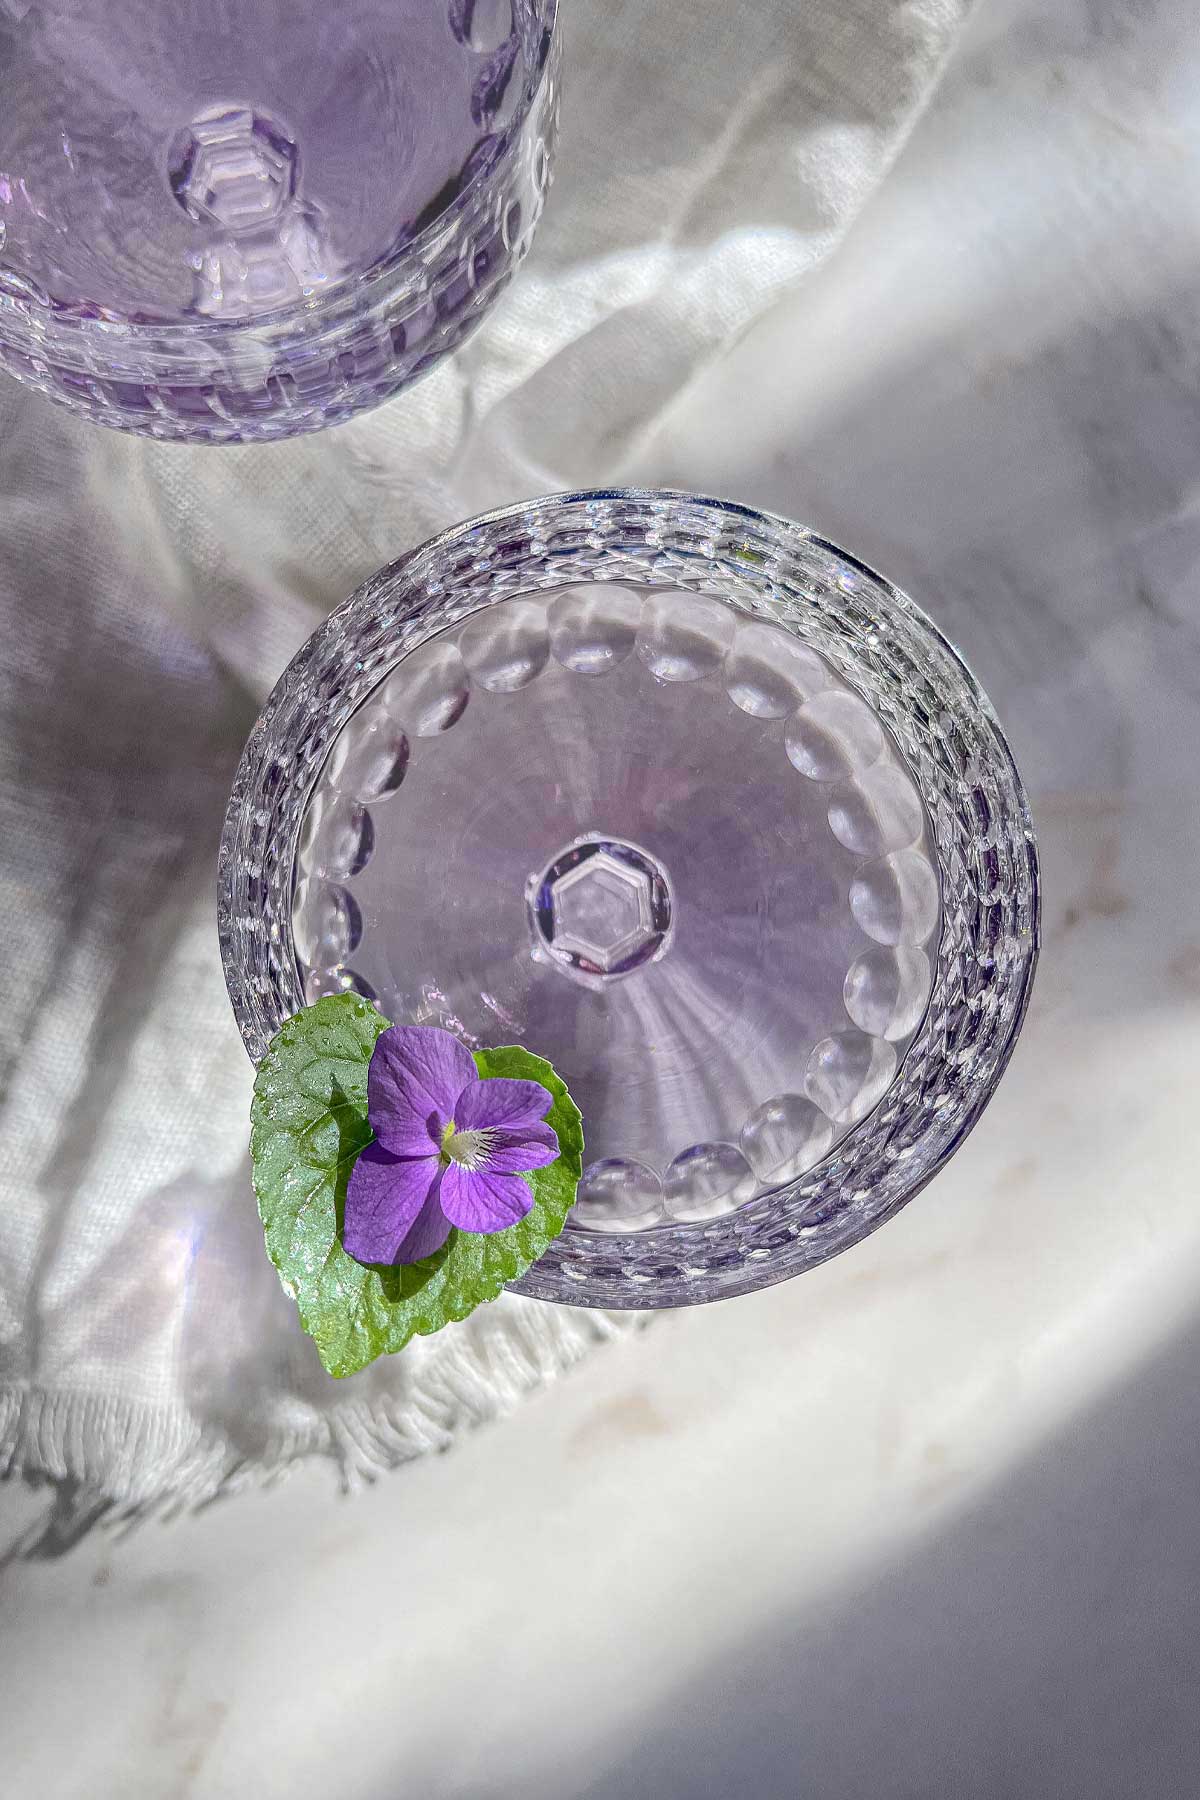 An overhead shot of a lavender hued Aviation Violet Cocktail in a cut crystal coupe glass. A garnish of a violet flower and leaf sit on the side of the glass.